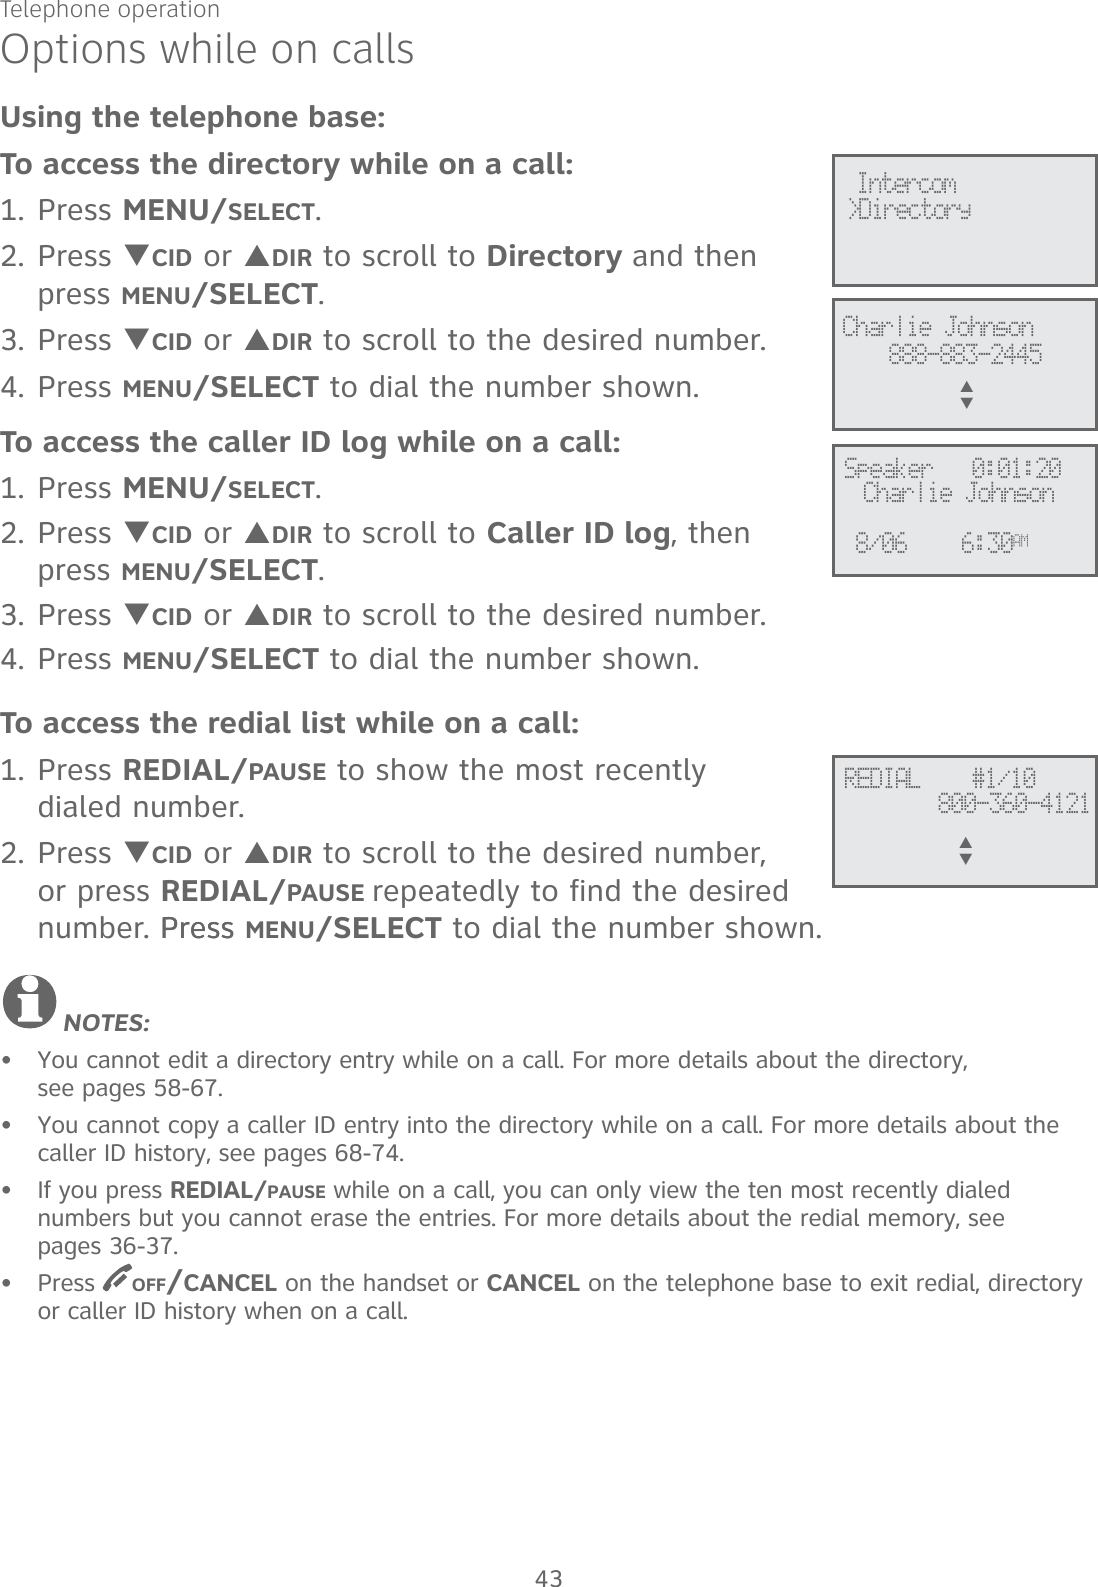 Telephone operation43Options while on callsUsing the telephone base:To access the directory while on a call:1. Press MENU/SELECT.2. Press TCID or SDIR to scroll to Directory and then press MENU/SELECT. 3. Press TCID or SDIR to scroll to the desired number. 4. Press MENU/SELECT to dial the number shown. To access the caller ID log while on a call:1. Press MENU/SELECT. 2. Press TCID or SDIR to scroll to Caller ID log, then press MENU/SELECT.3. Press TCID or SDIR to scroll to the desired number. 4. Press MENU/SELECT to dial the number shown. To access the redial list while on a call:1. Press REDIAL/PAUSE to show the most recently  dialed number. 2. Press TCID or SDIR to scroll to the desired number, or press REDIAL/PAUSE repeatedly to find the desired number. Press Press MENU/SELECT to dial the number shown.NOTES:You cannot edit a directory entry while on a call. For more details about the directory,  see pages 58-67.You cannot copy a caller ID entry into the directory while on a call. For more details about the caller ID history, see pages 68-74.If you press REDIAL/PAUSE while on a call, you can only view the ten most recently dialed  numbers but you cannot erase the entries. For more details about the redial memory, see  pages 36-37.Press  OFF/CANCEL on the handset or CANCEL on the telephone base to exit redial, directory or caller ID history when on a call.••••REDIAL    #1/10800-360-4121S      T&gt;Directory Intercom888-883-2445Charlie JohnsonS      TSpeaker   0:01:20Charlie Johnson6:30AM8/06